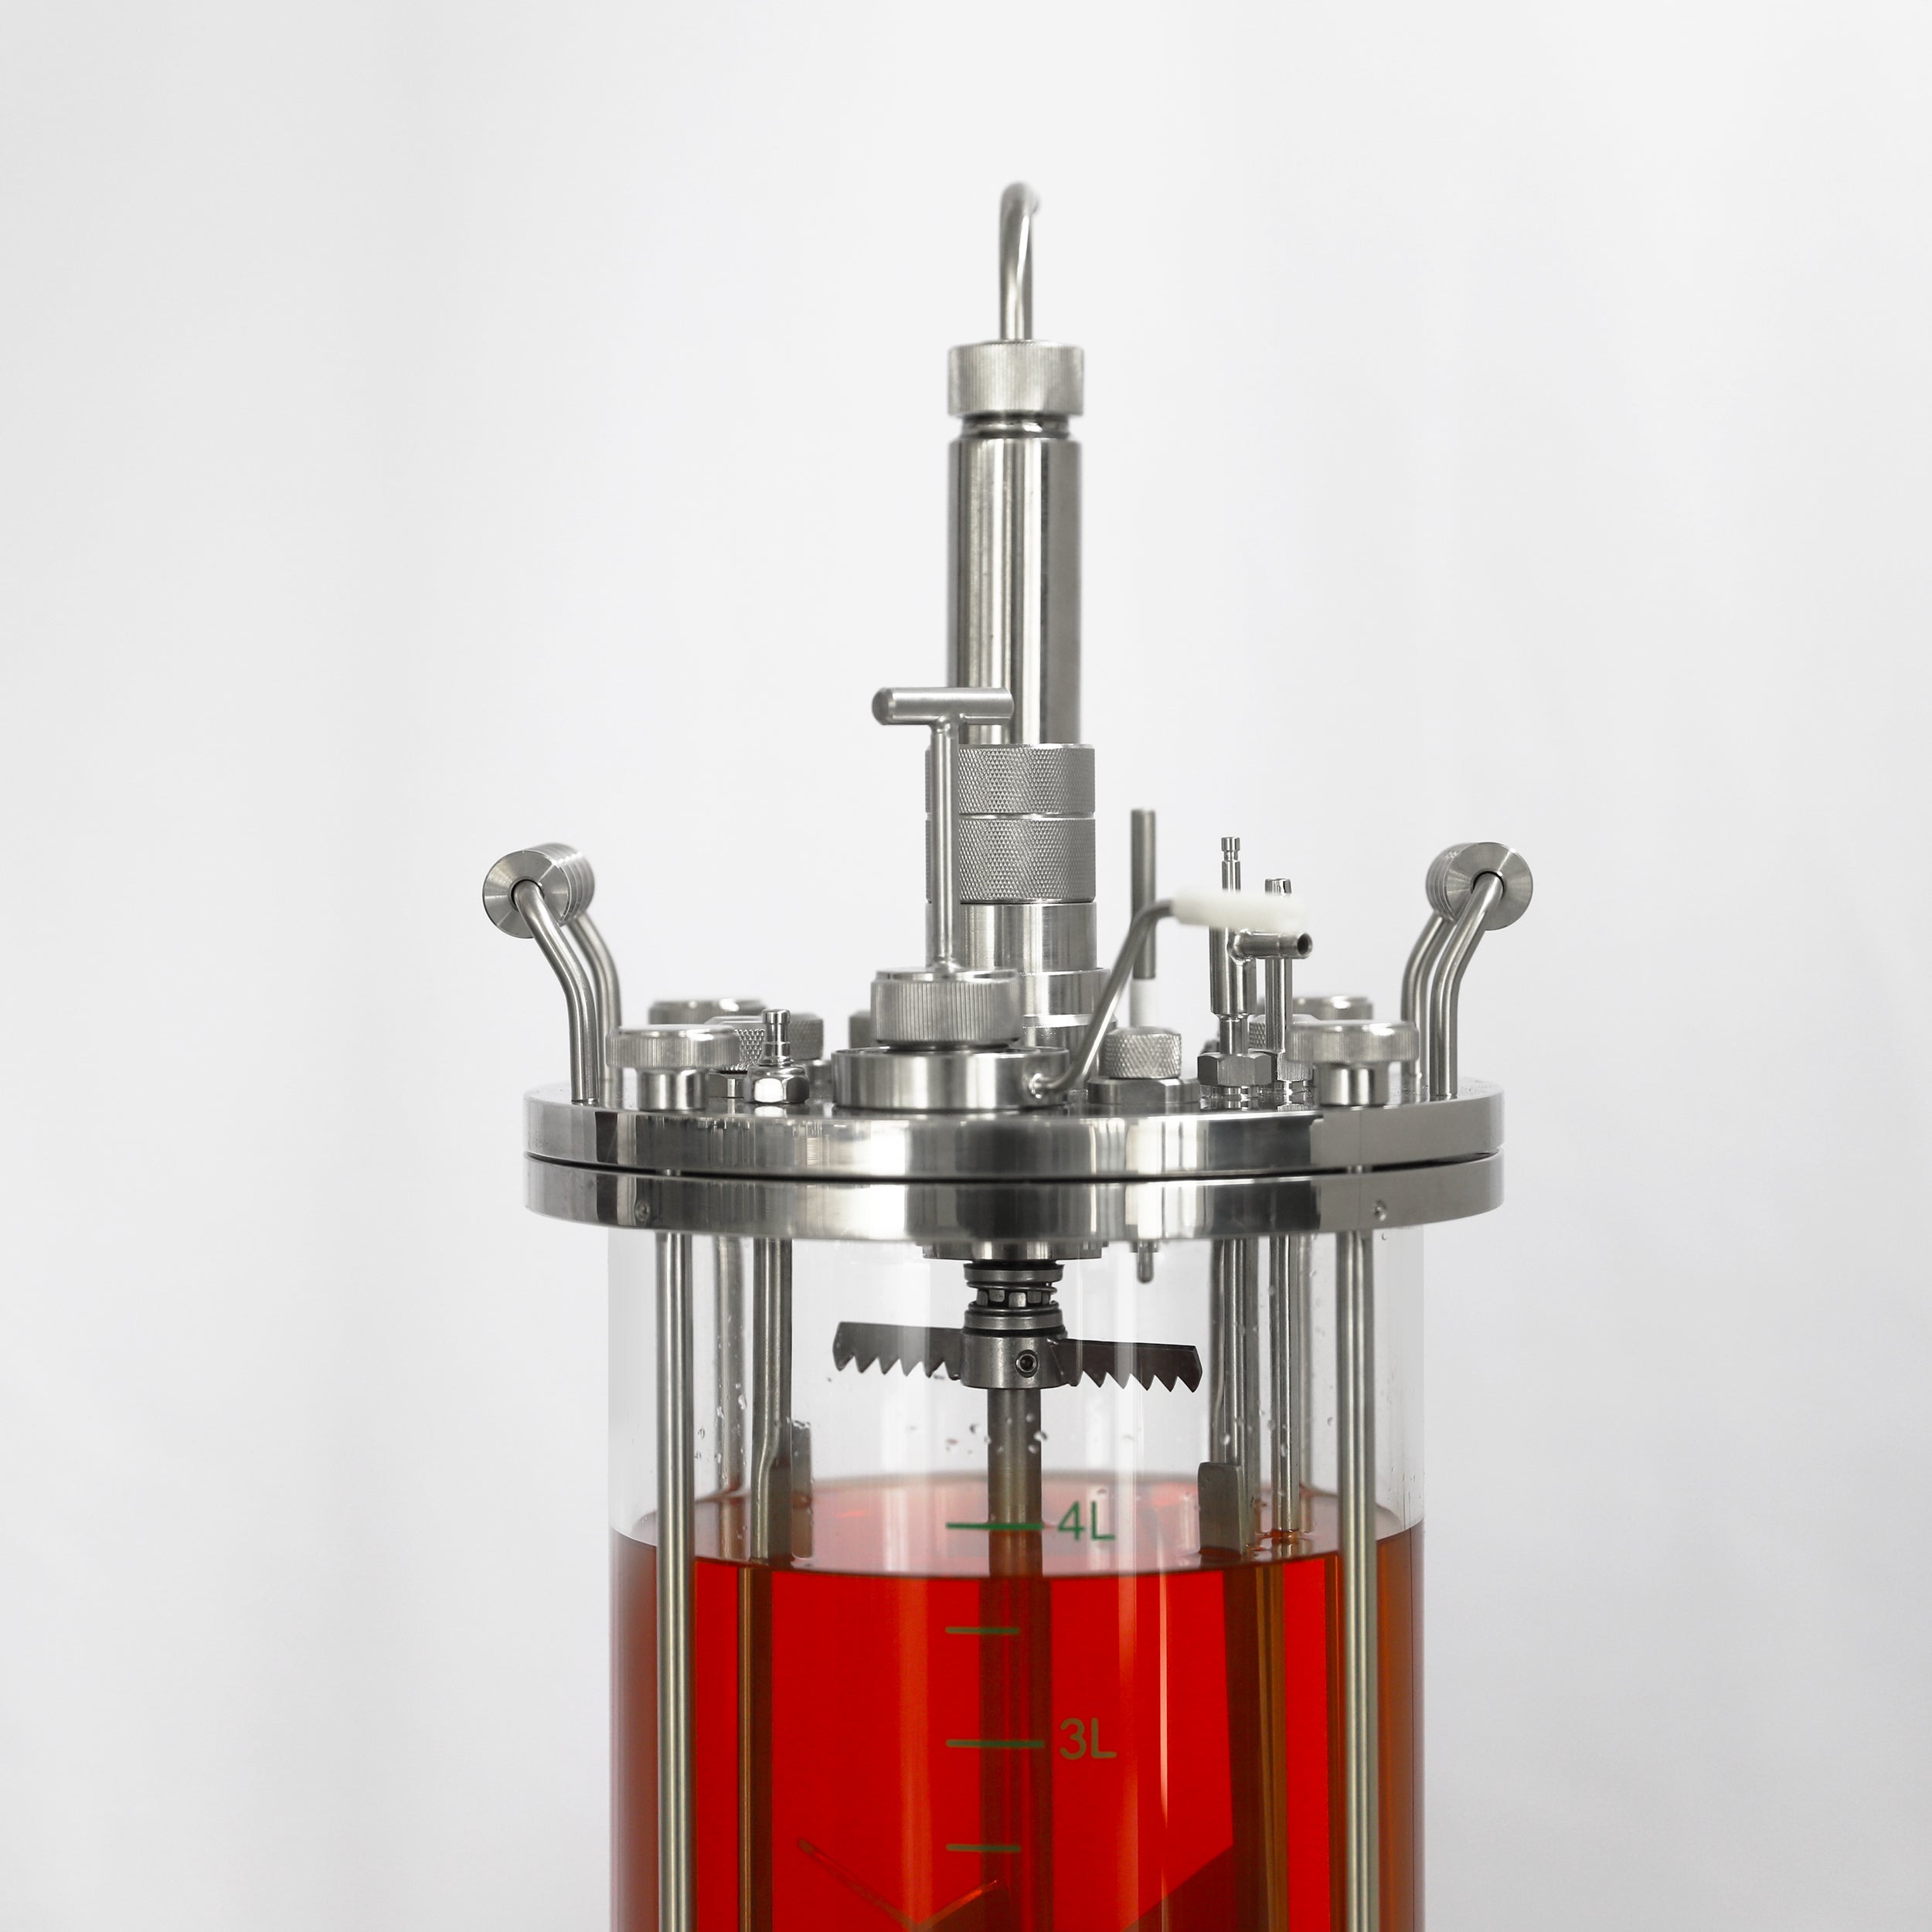 5L Benchtop Bioreactor for Microbial Fermentation with 2 Gas Inlets BR100-C1